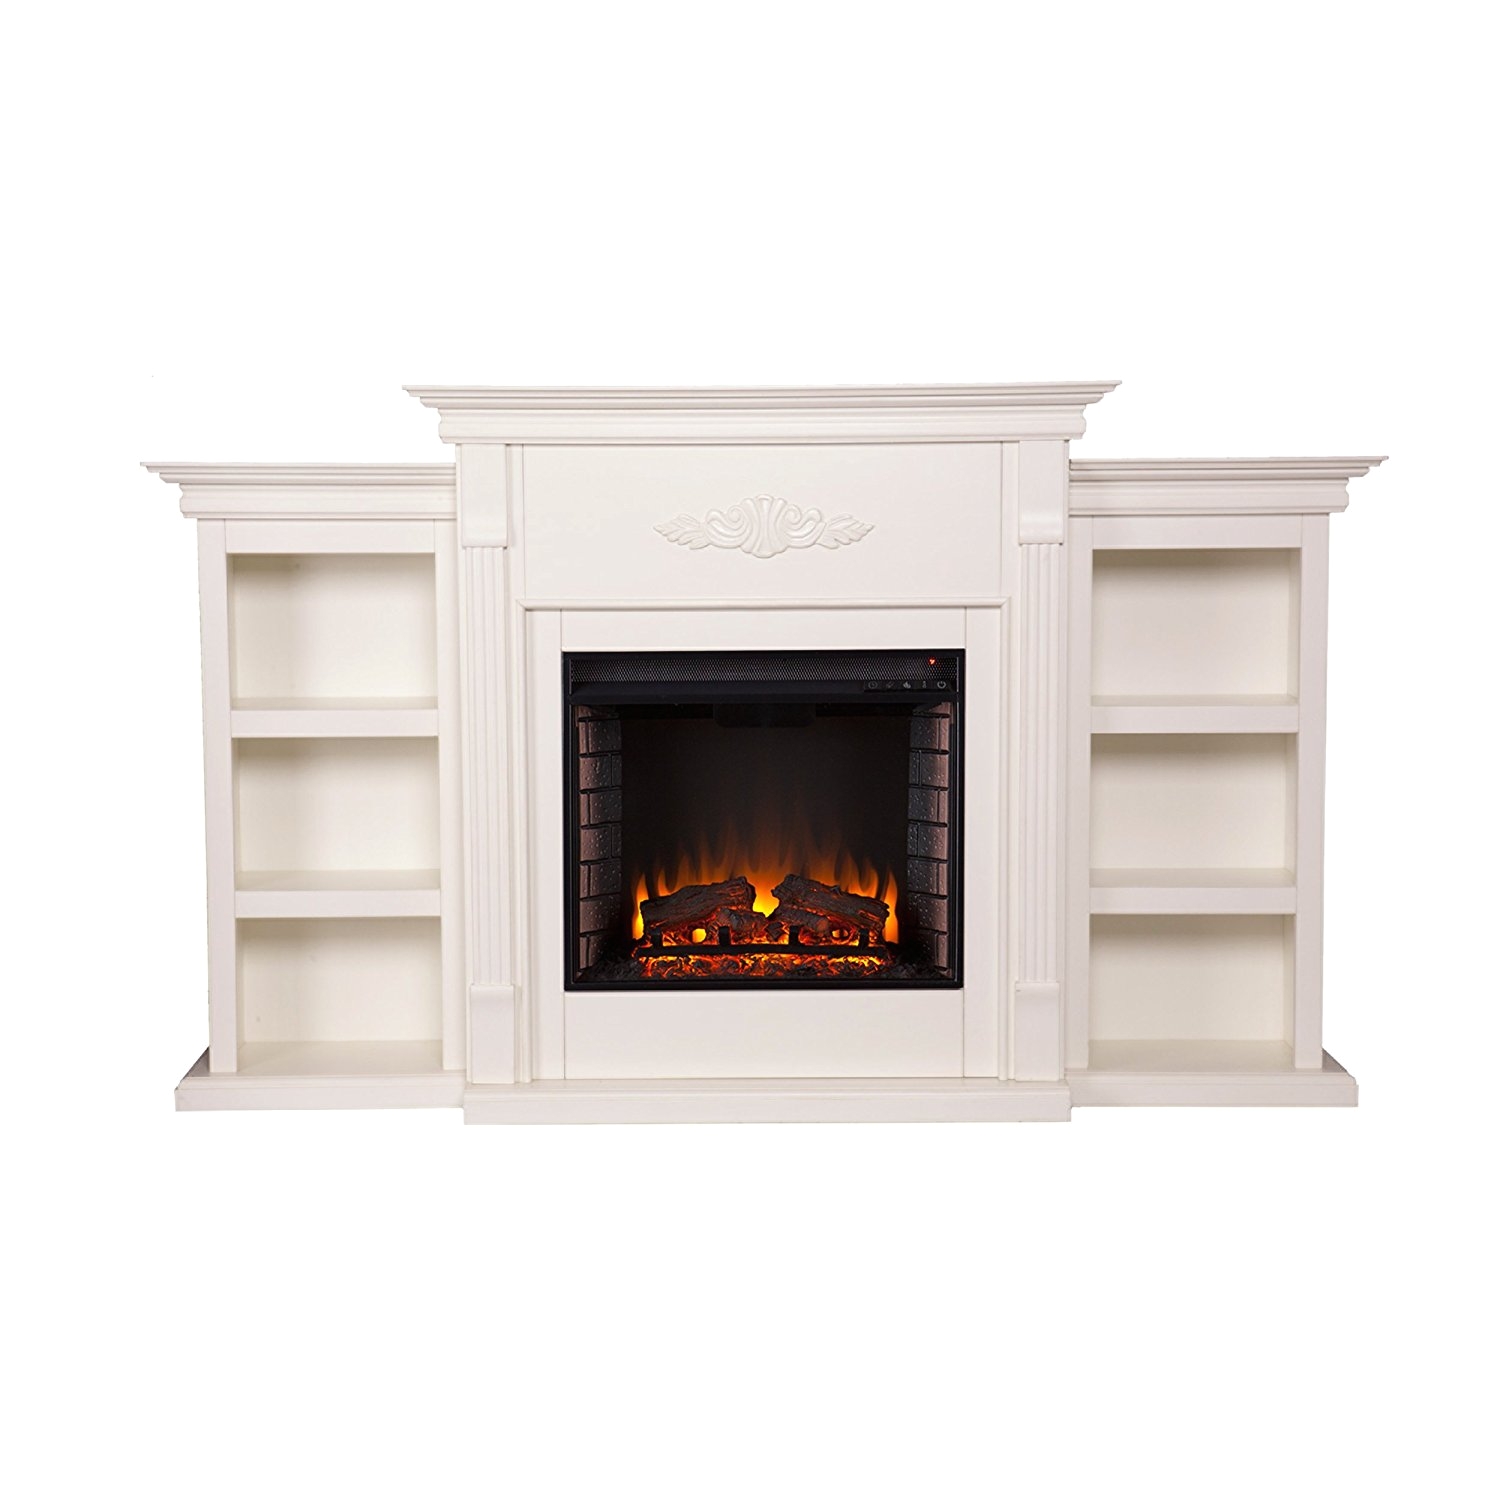 amazon com southern enterprises tennyson electric fireplace with bookcase ivory finish kitchen dining